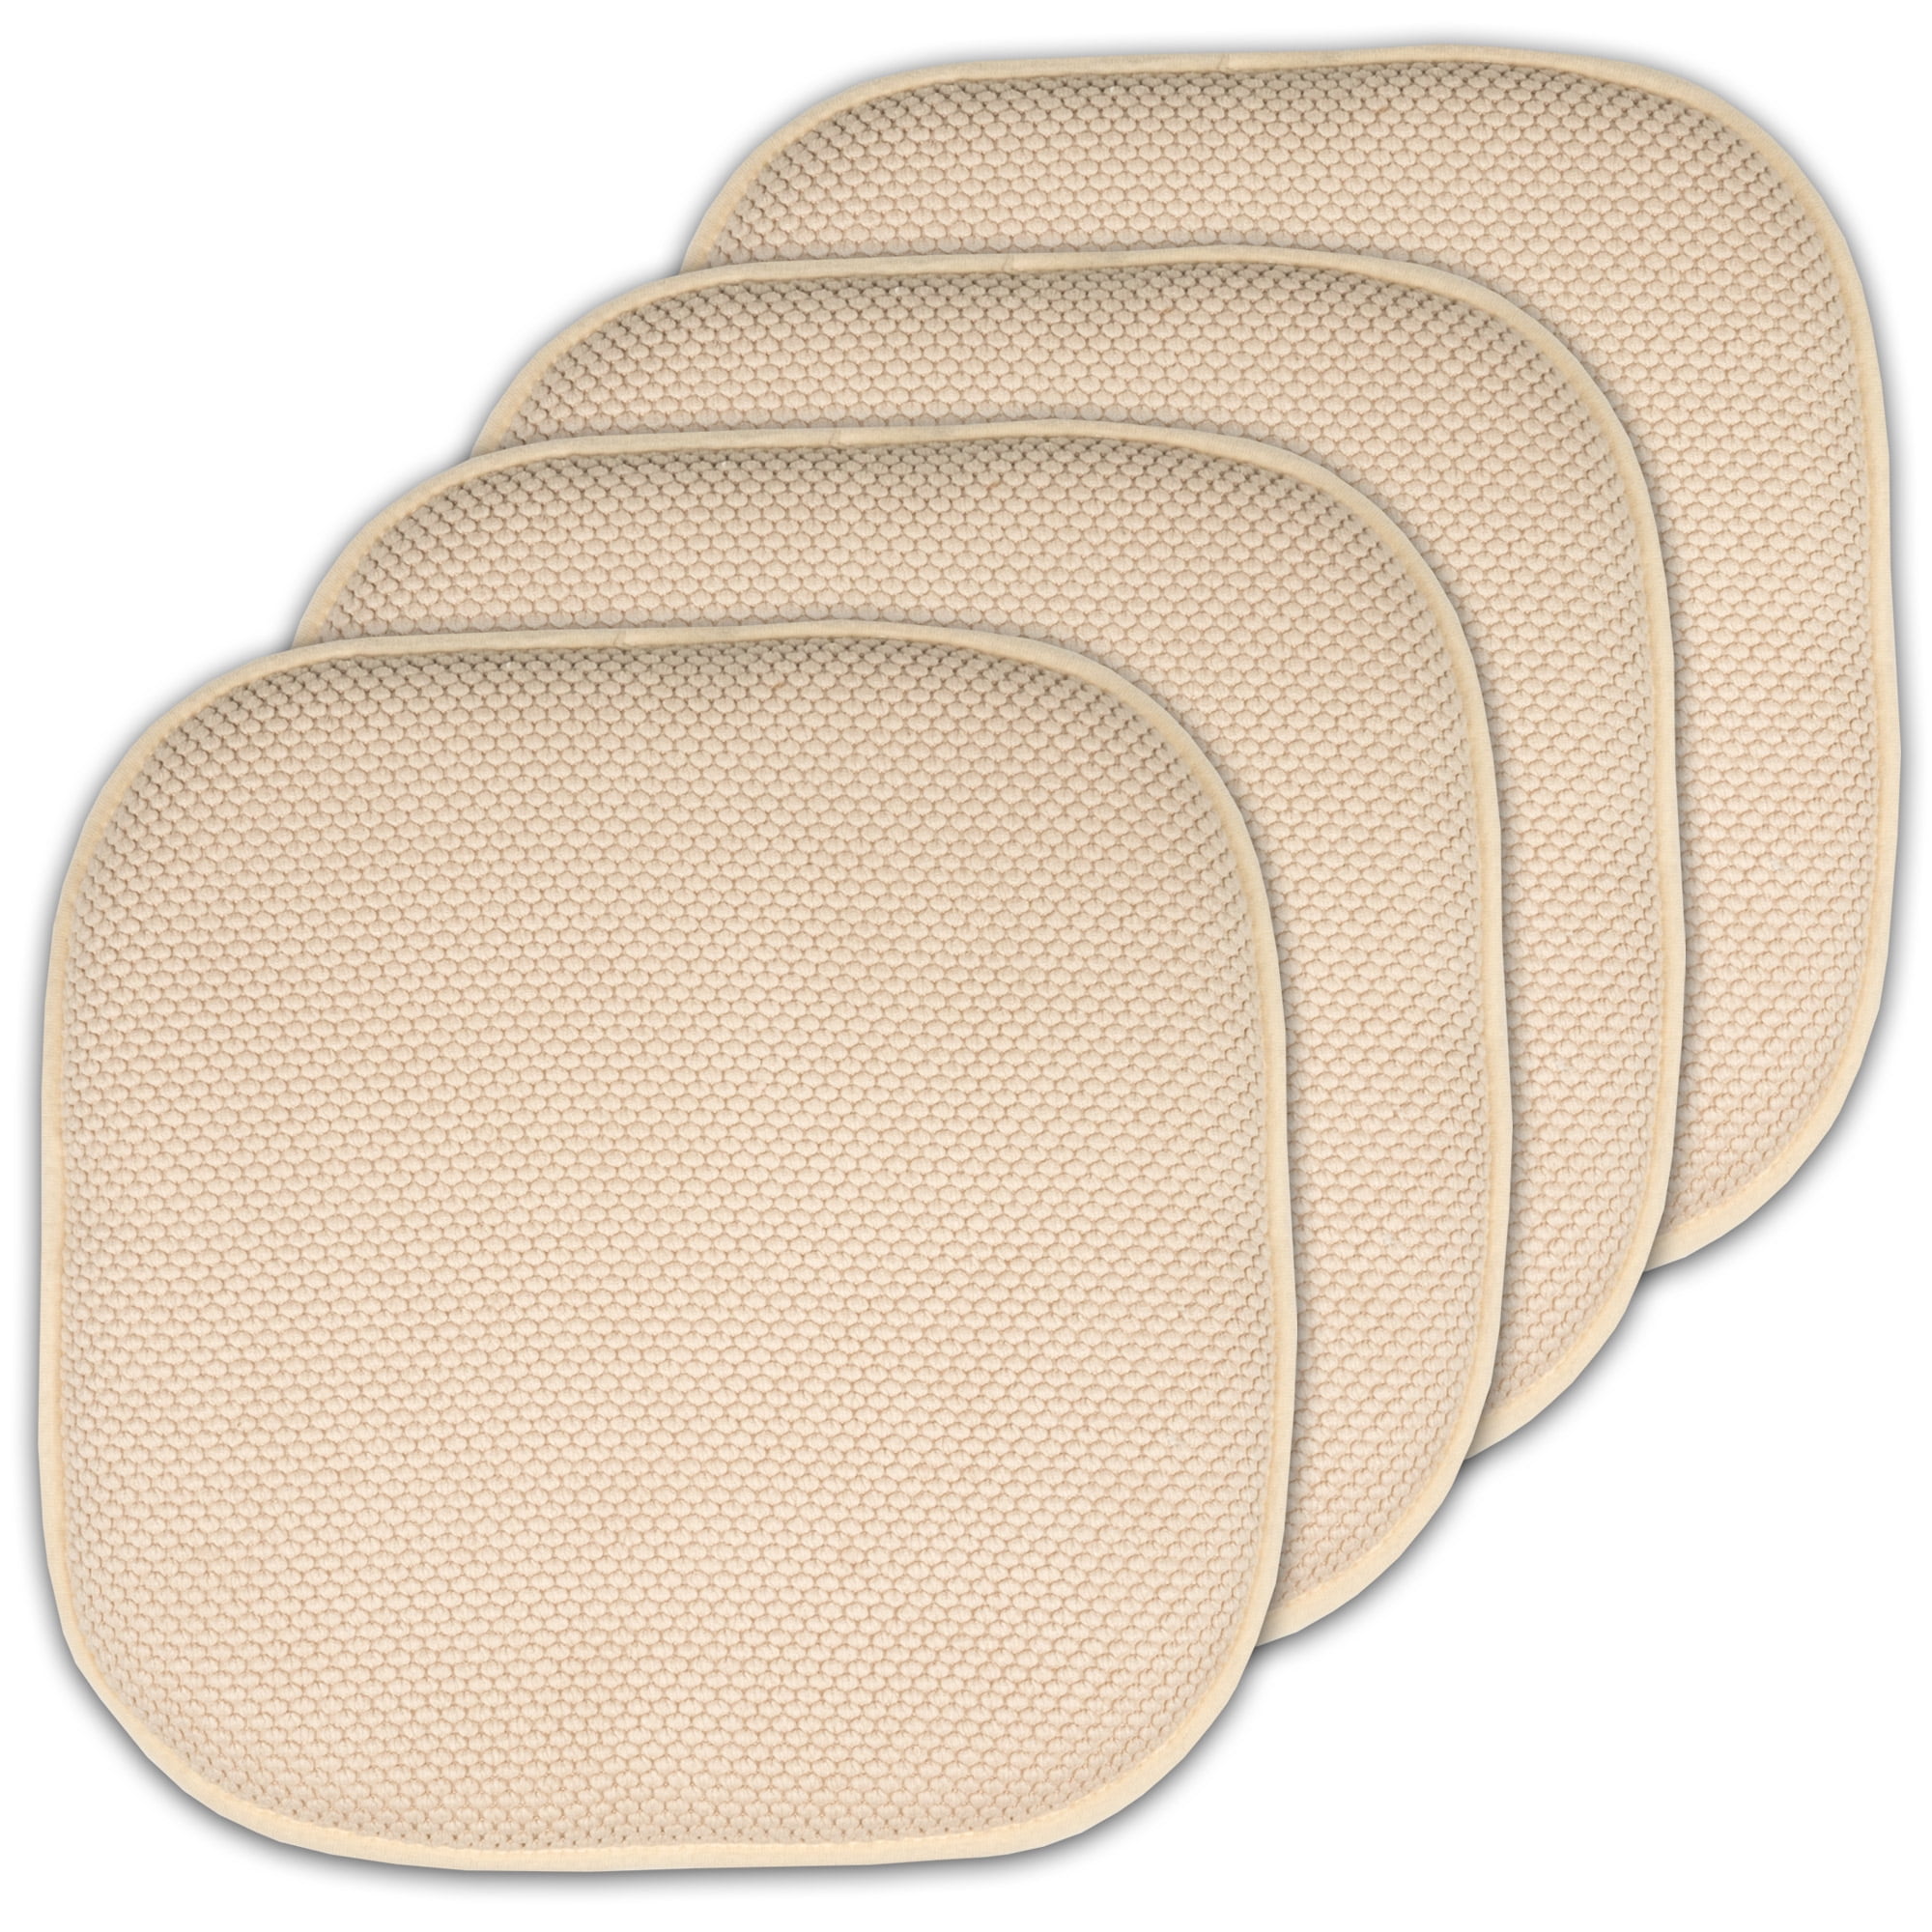 16x16 Inch Thick Soft Seat Cushion Pads Non Slip with SBR Backing and Straps Durable Mats Pads for Lounge Kitchen Sand H.VERSAILTEX Premium Chair Cushions Memory Foam Chair Pads 4 Pack 